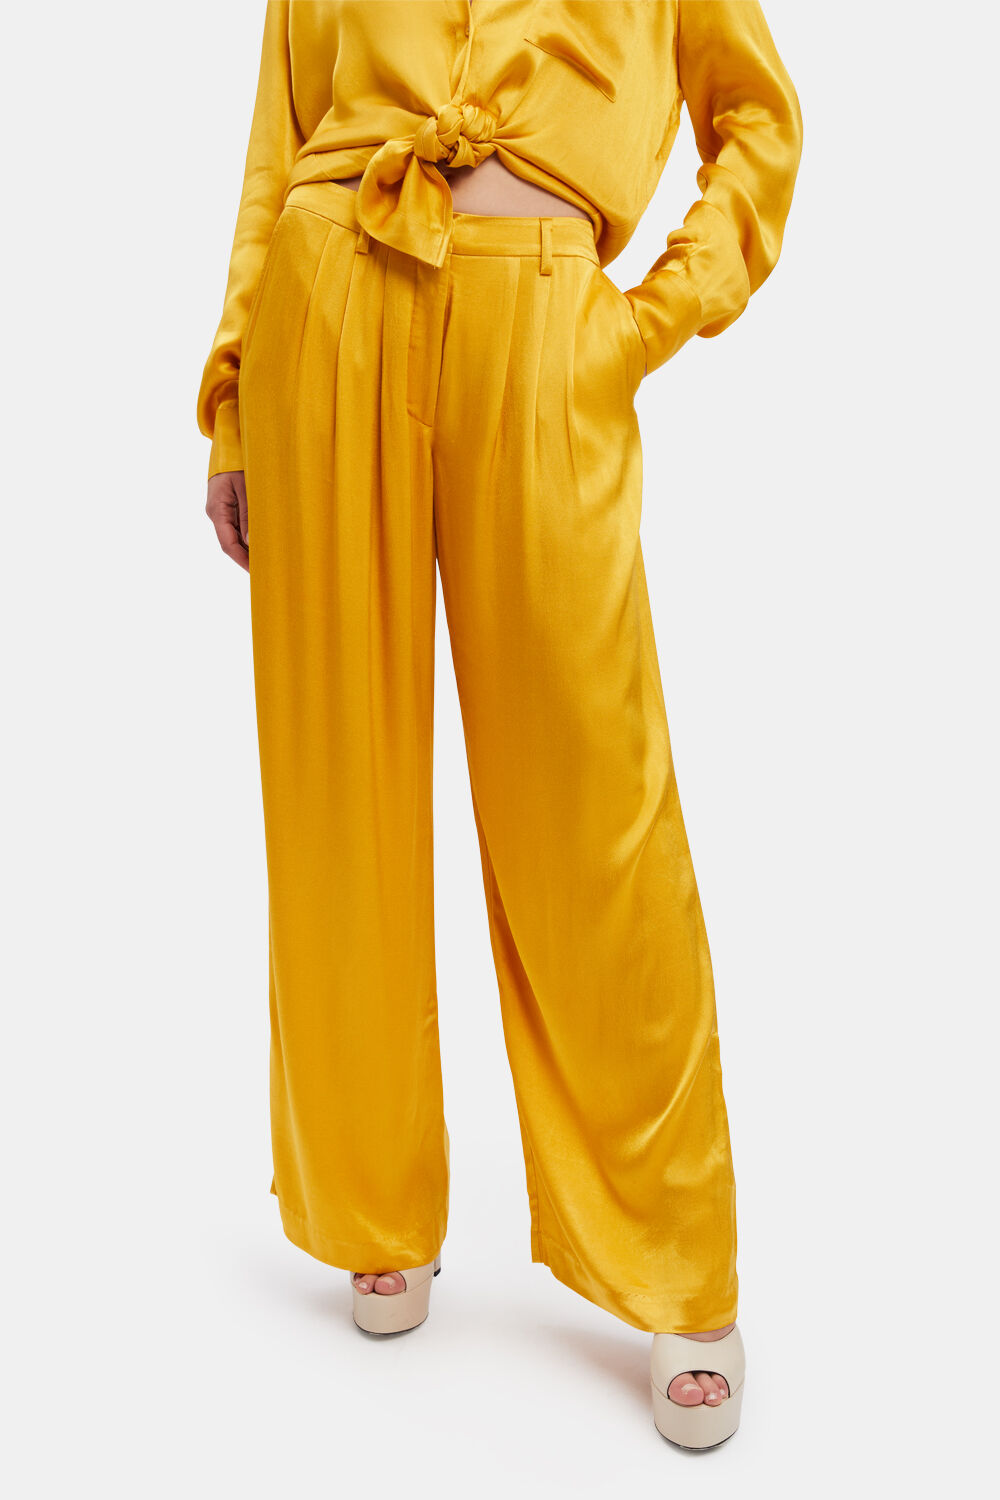 LENA PIN TUCK PANT in colour PALE MARIGOLD